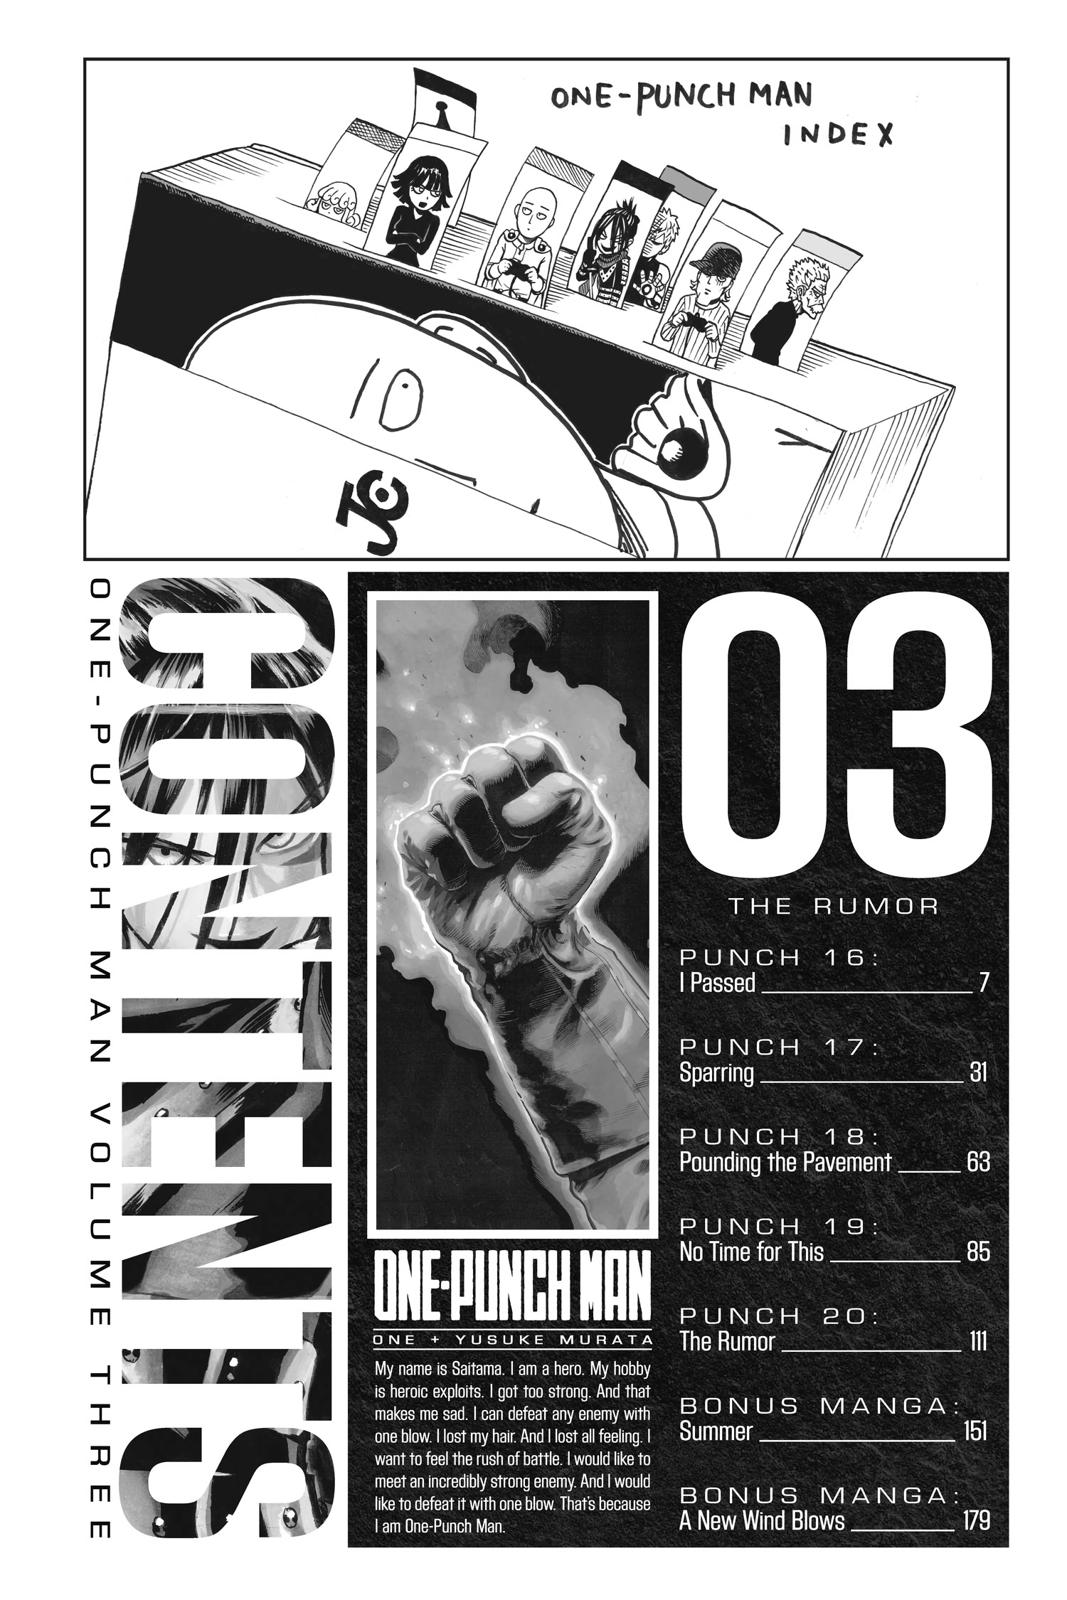 One-Punch Man, Punch 16 image 06